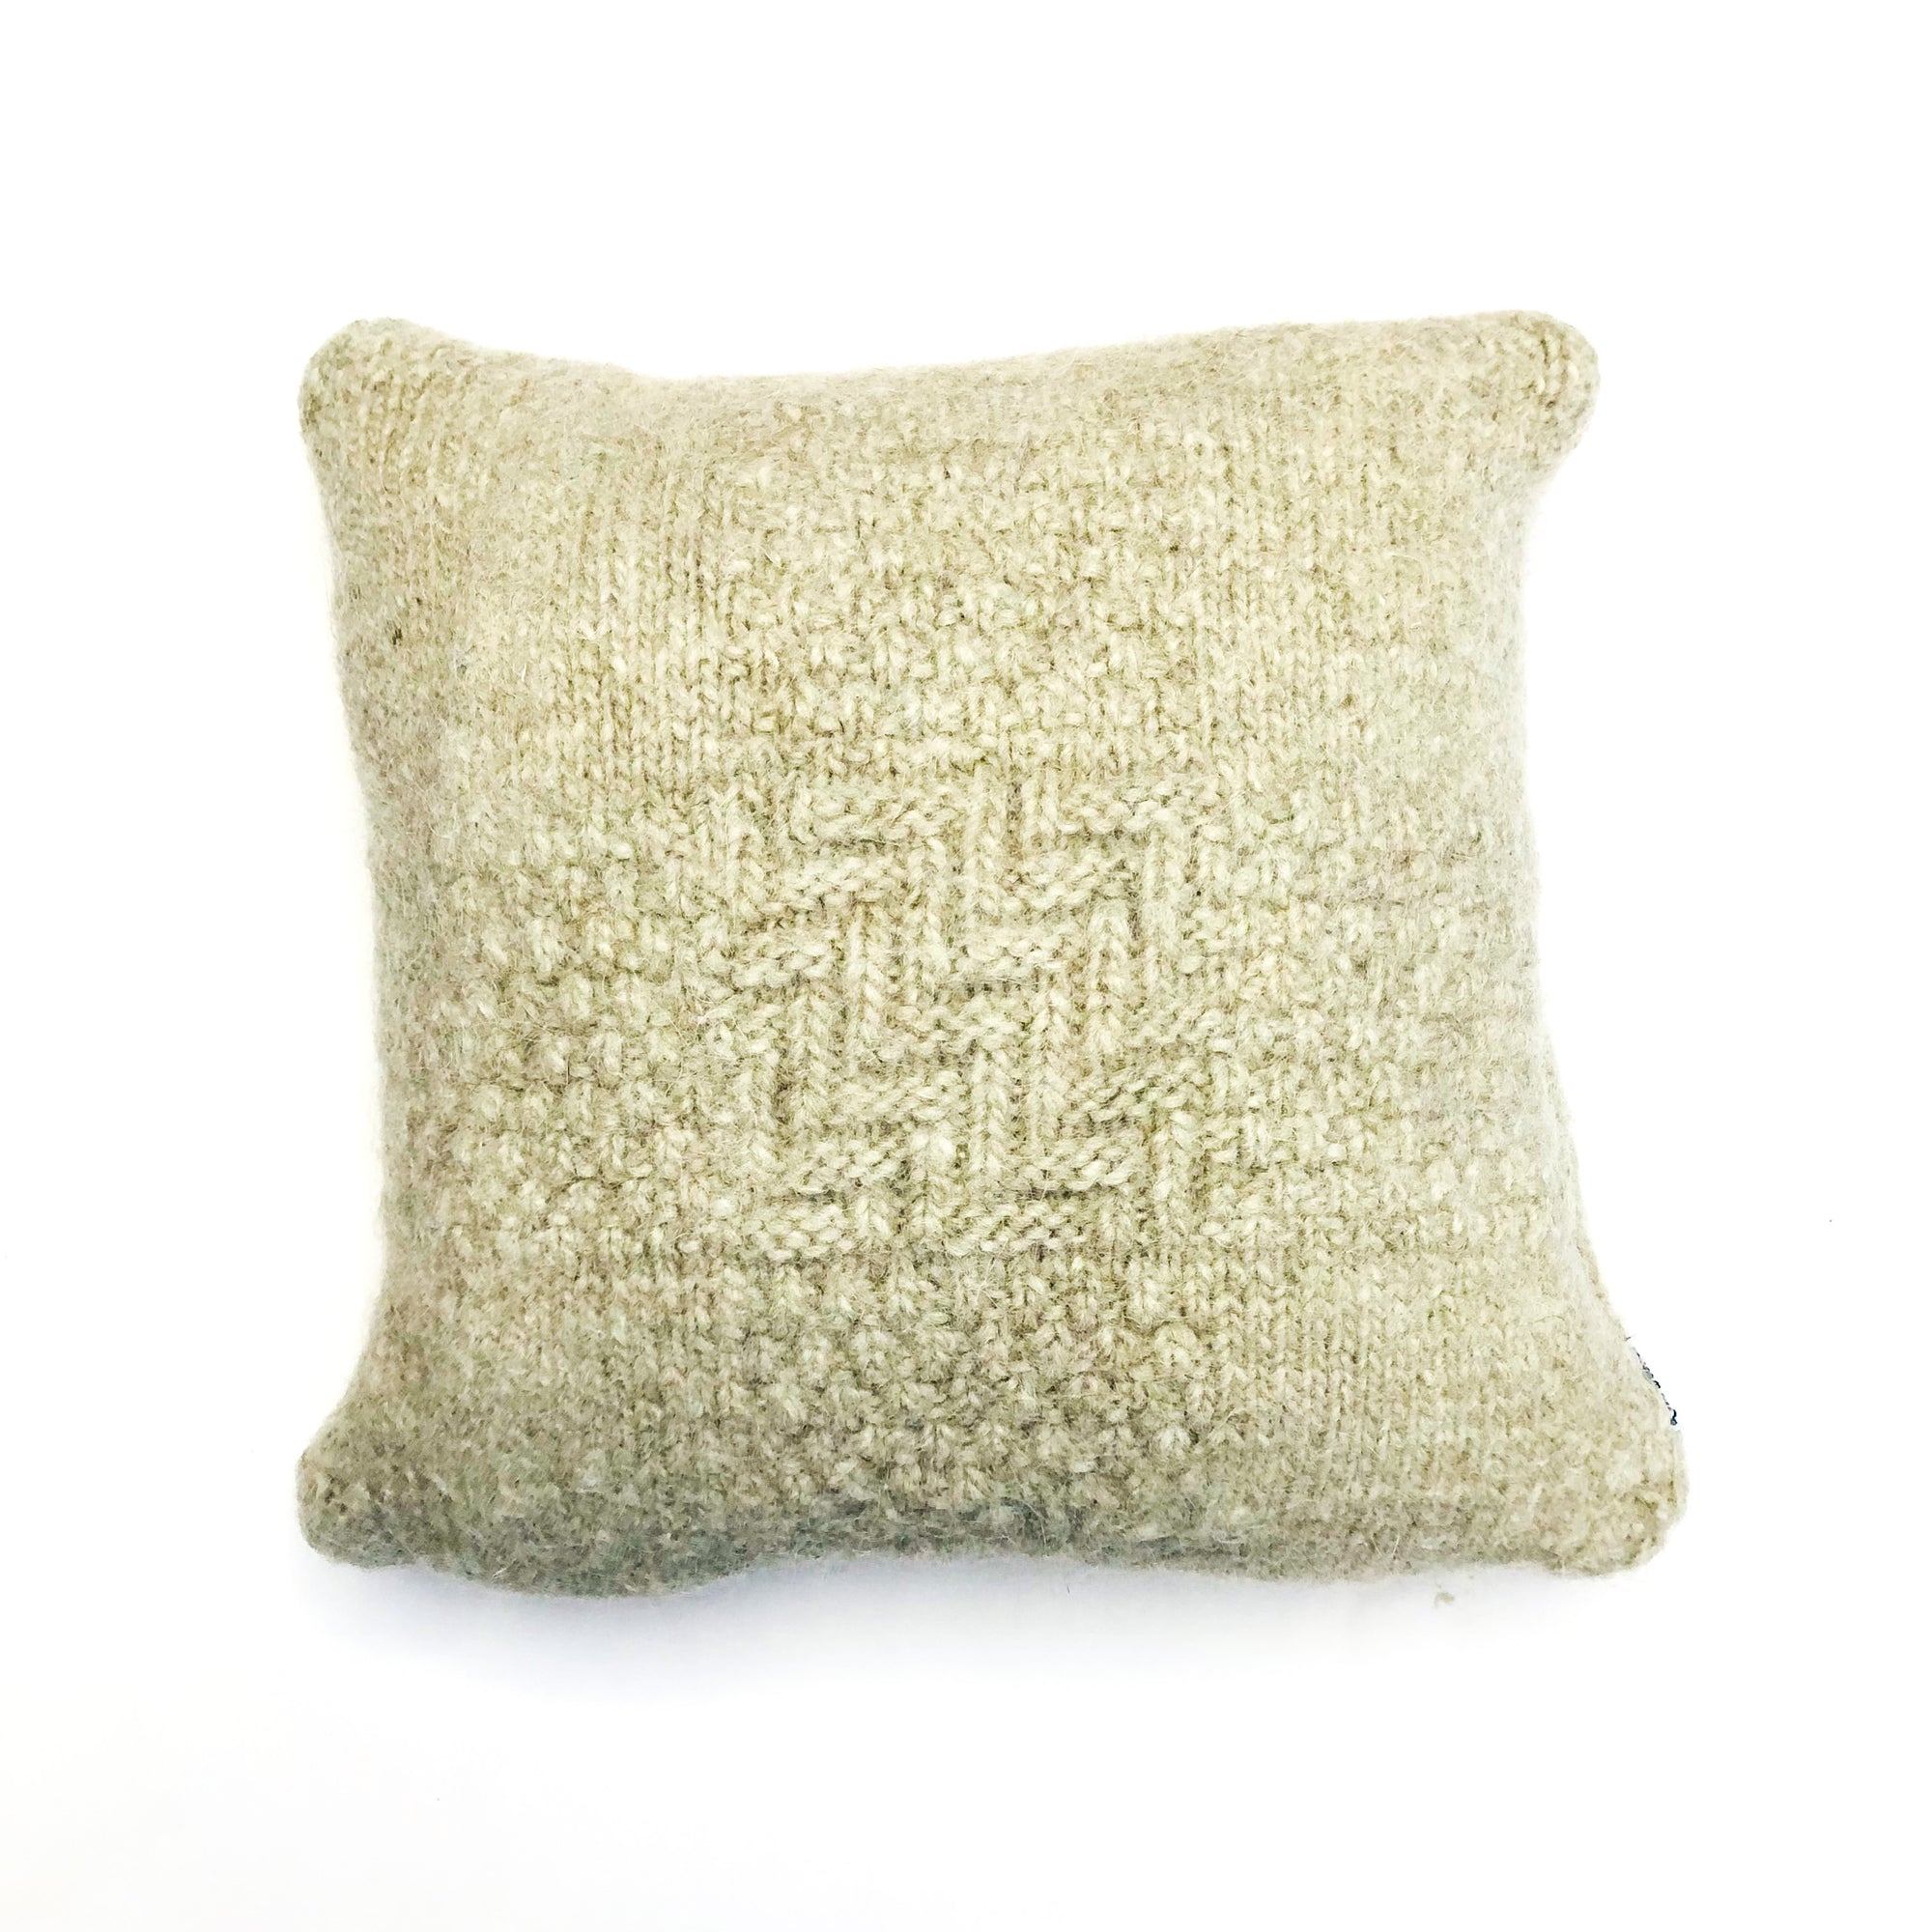 12 x 12 Wool Pillow Cover